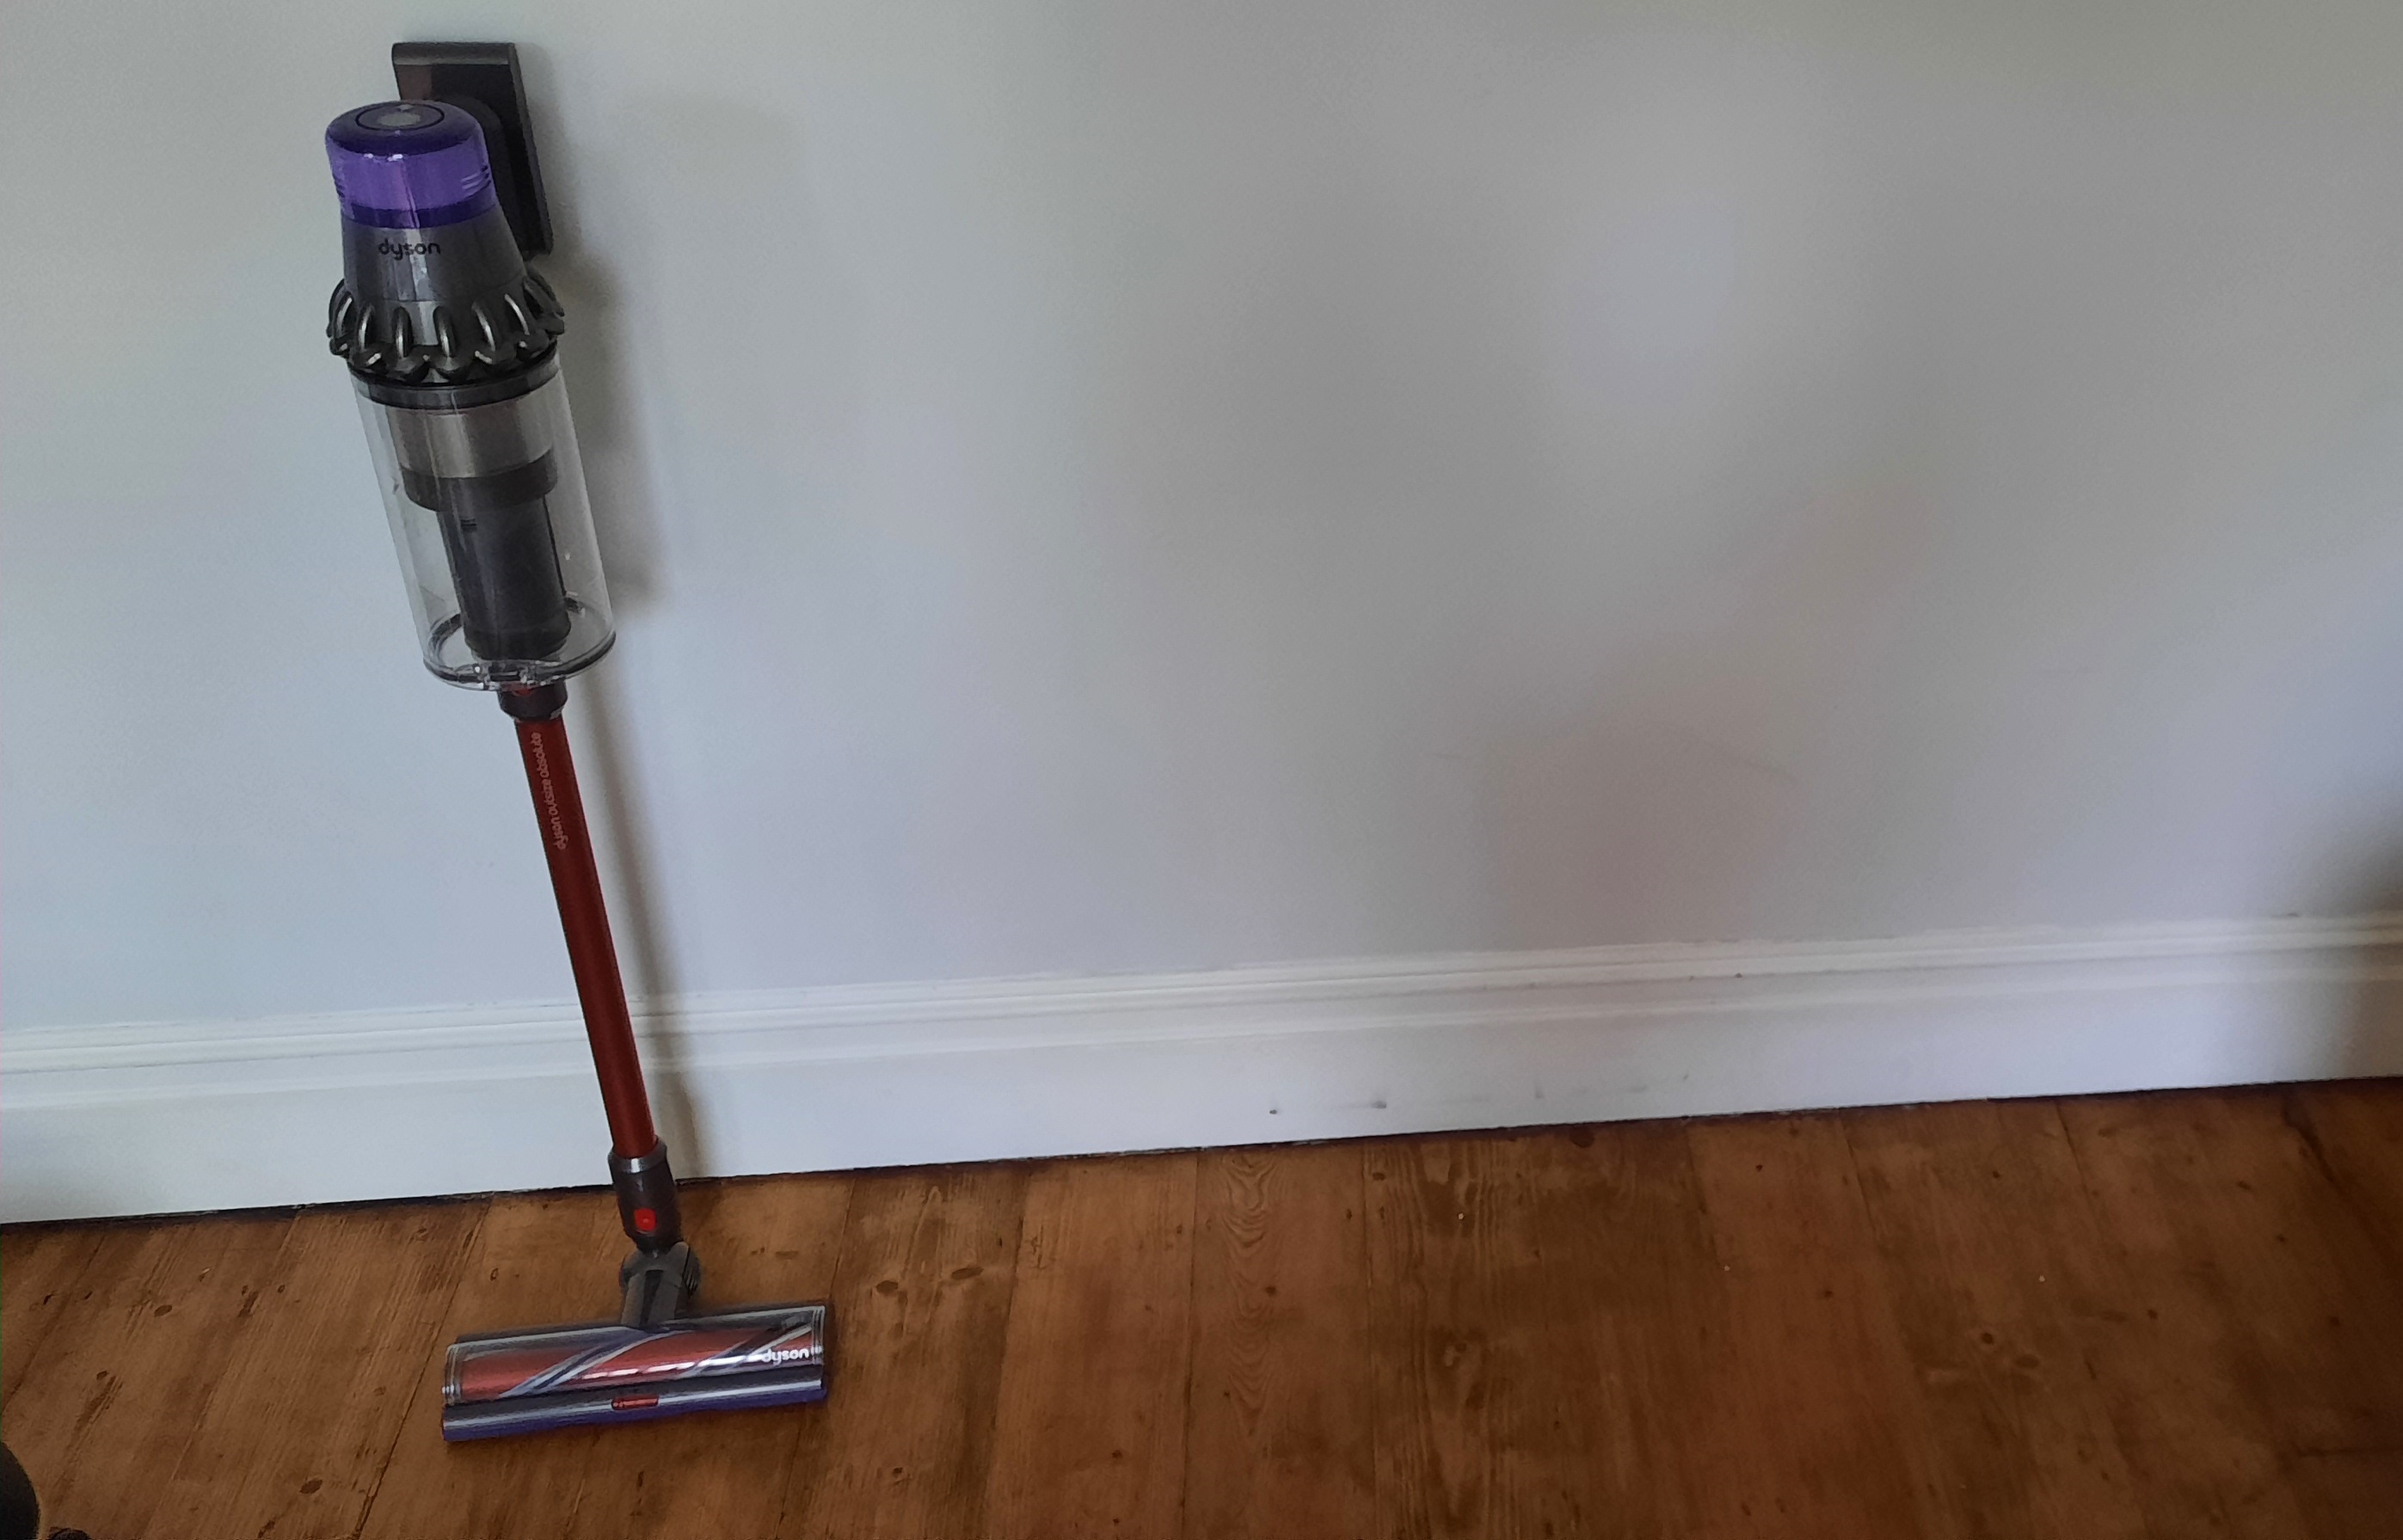 dyson v11 outsize stood next to the wall